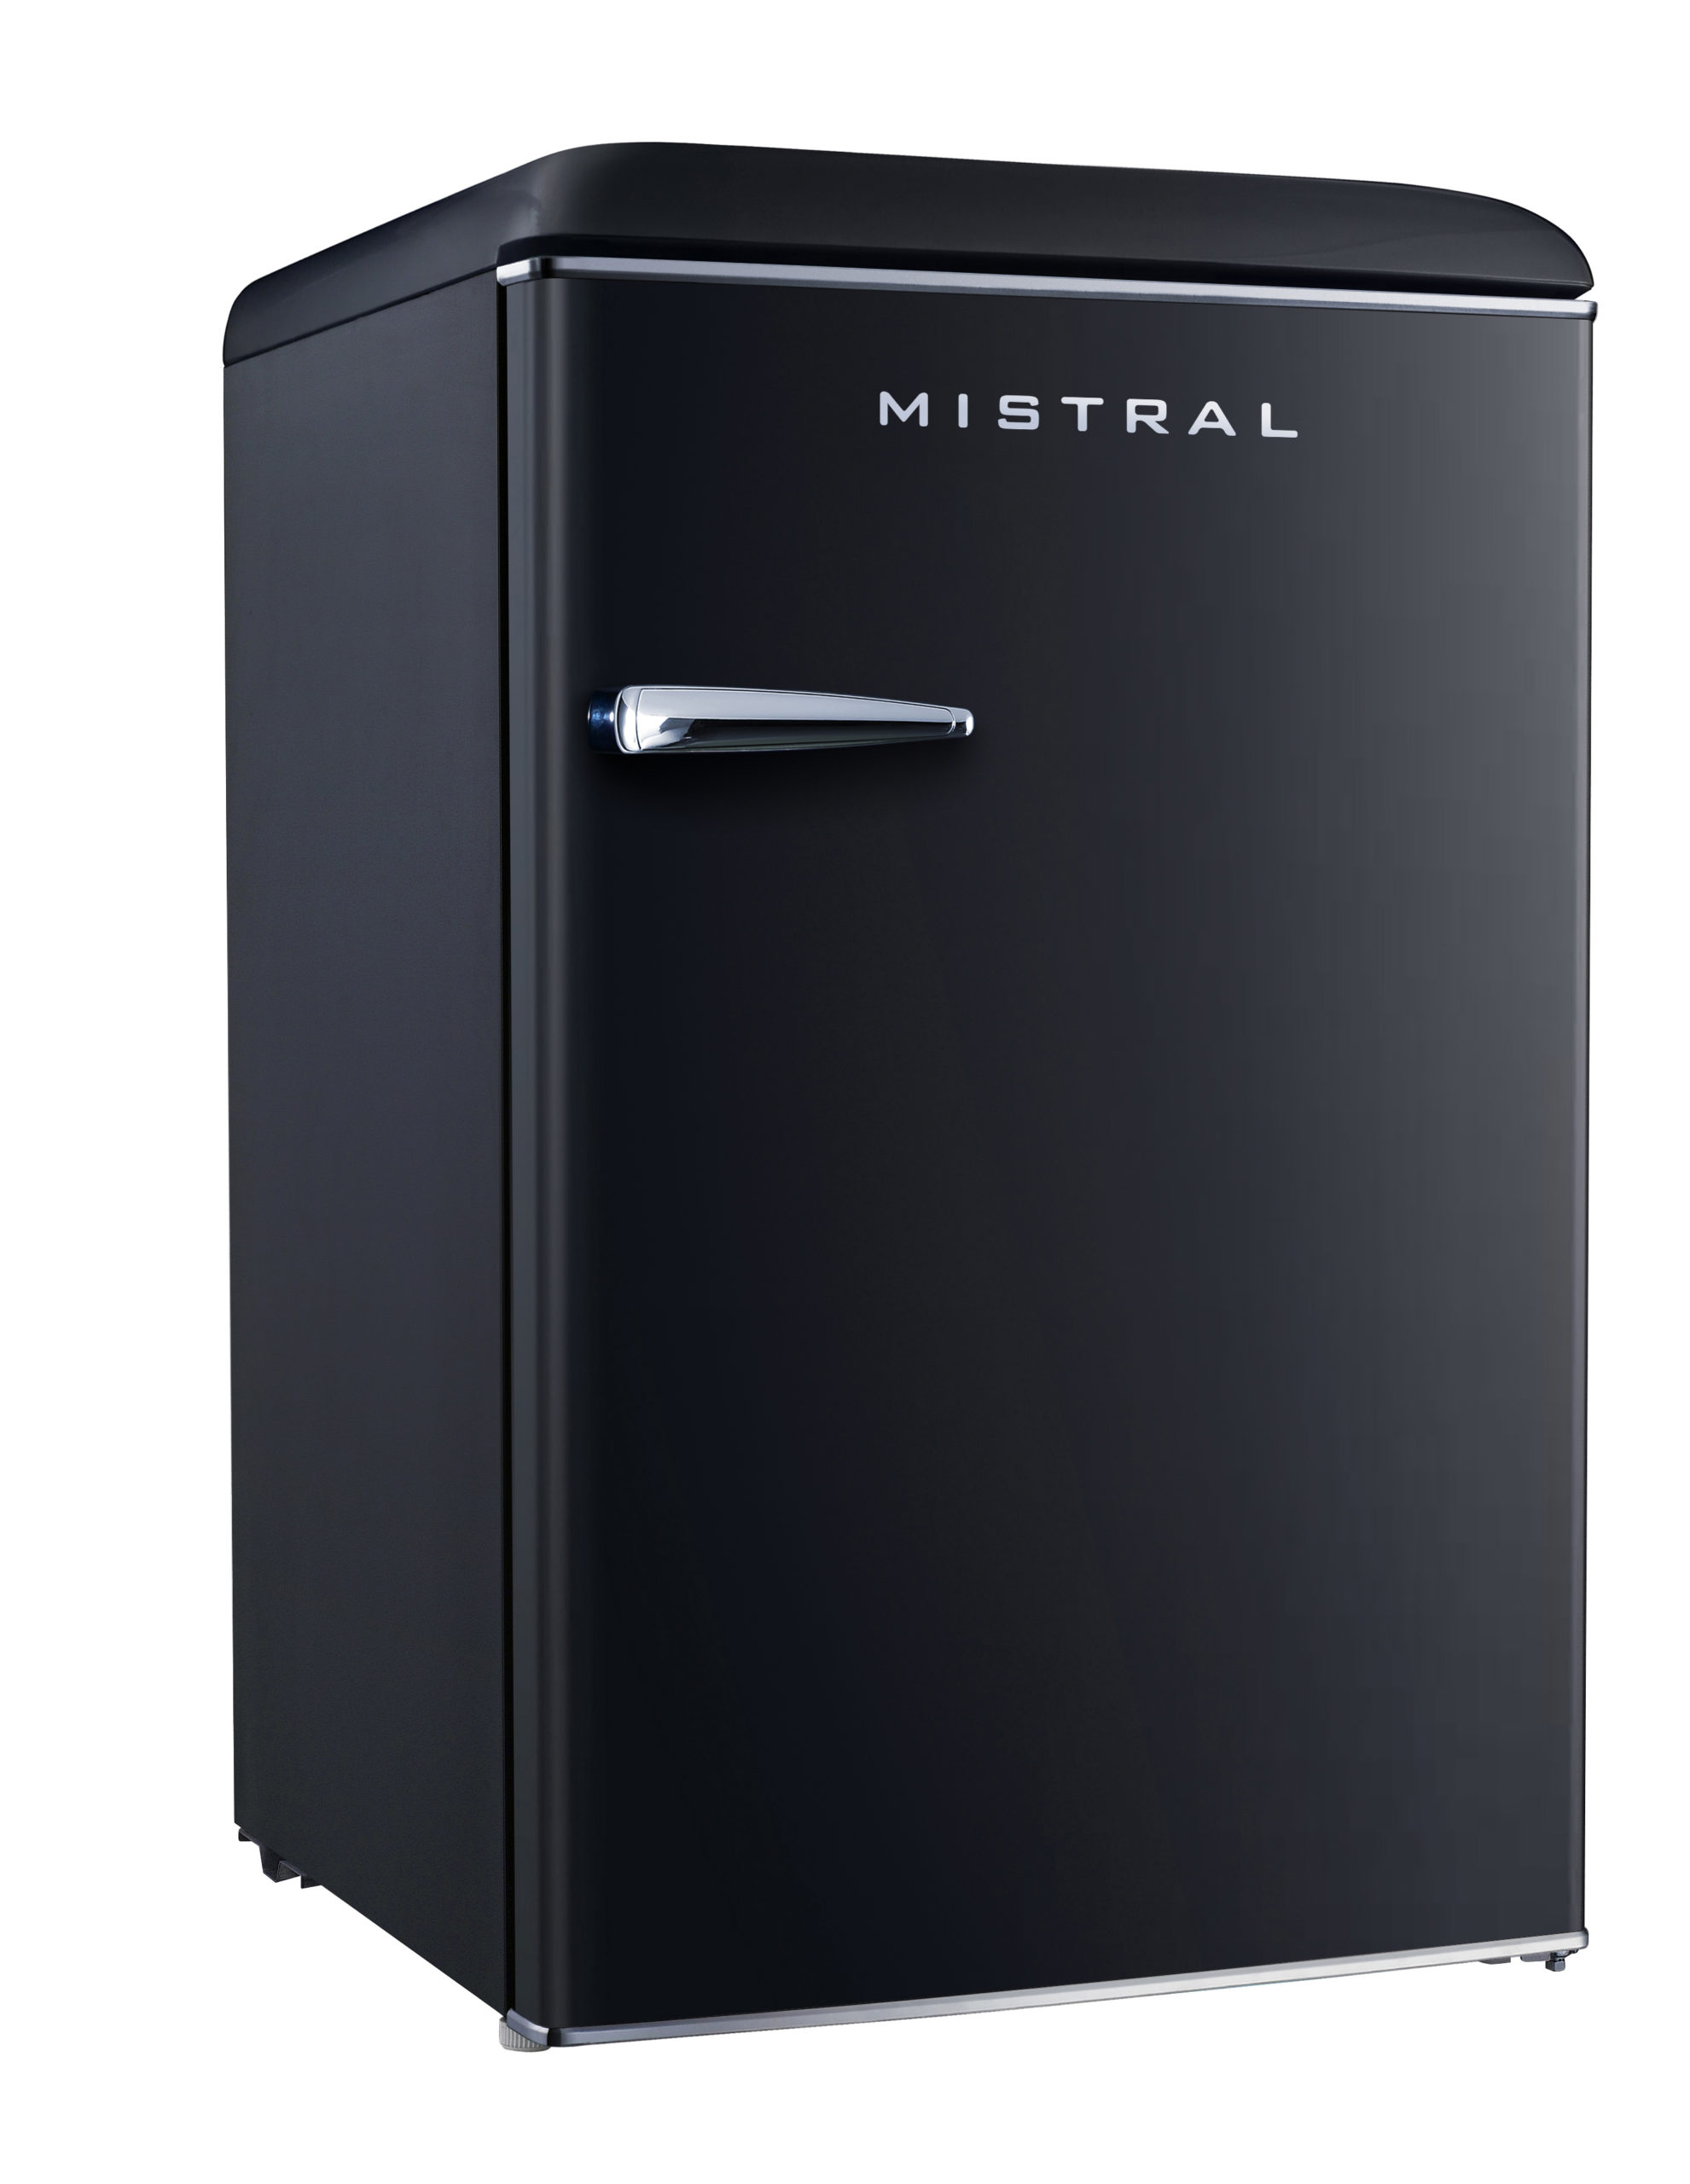 Bring an element of retro style your home with the Mistral 117L Retro ...